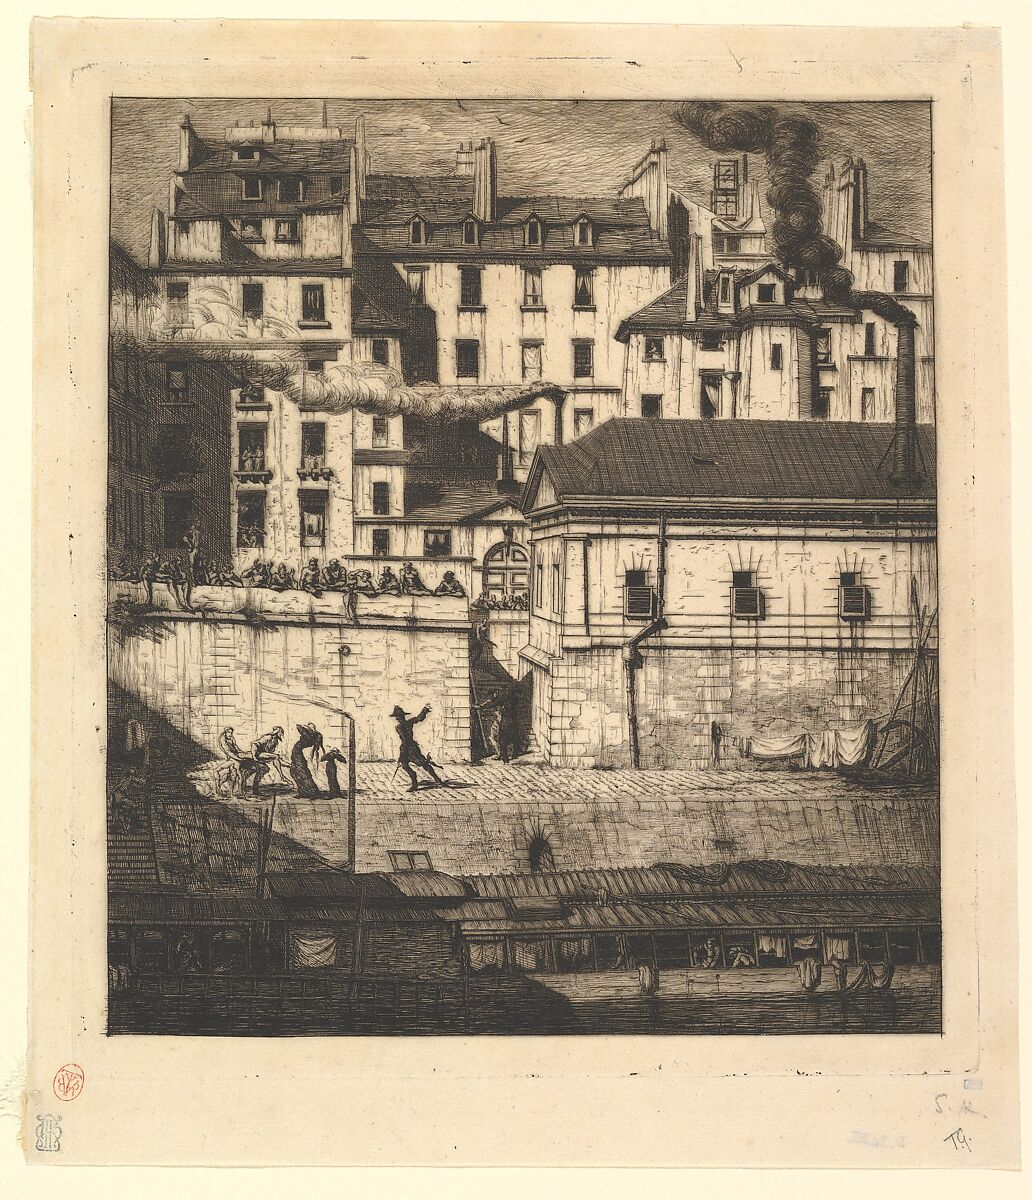 The Mortuary, Paris (La Morgue), Charles Meryon (French, 1821–1868), Etching and drypoint, third state of seven 